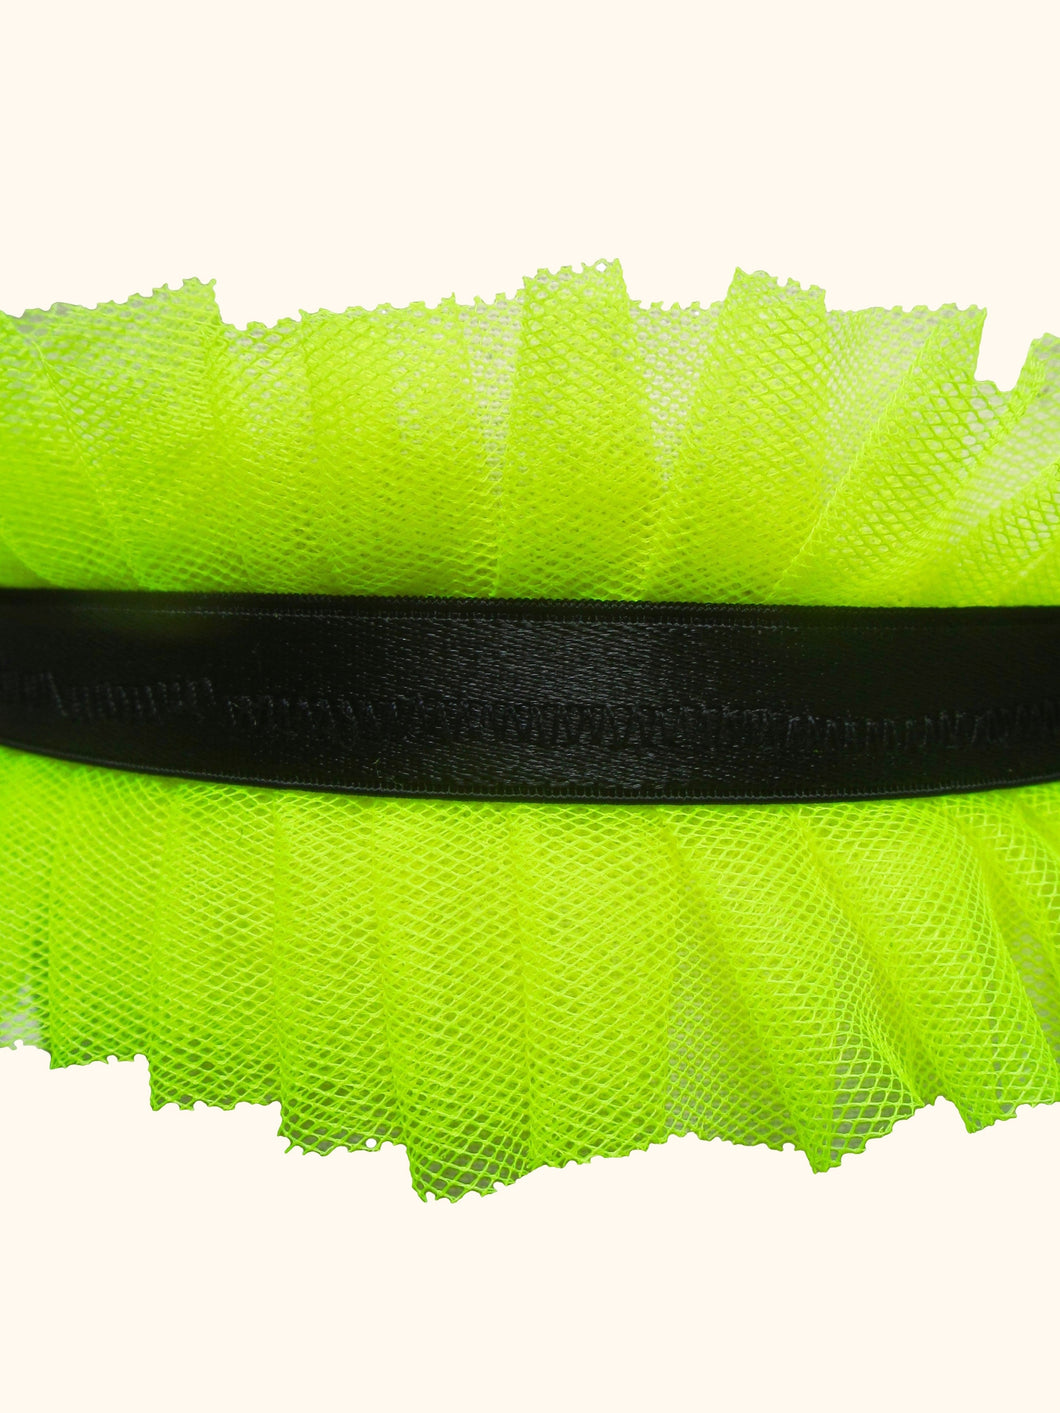 A close up of a choker with a central black satin elastic band. Either side of the band are neon yellow pleated tulle frills.